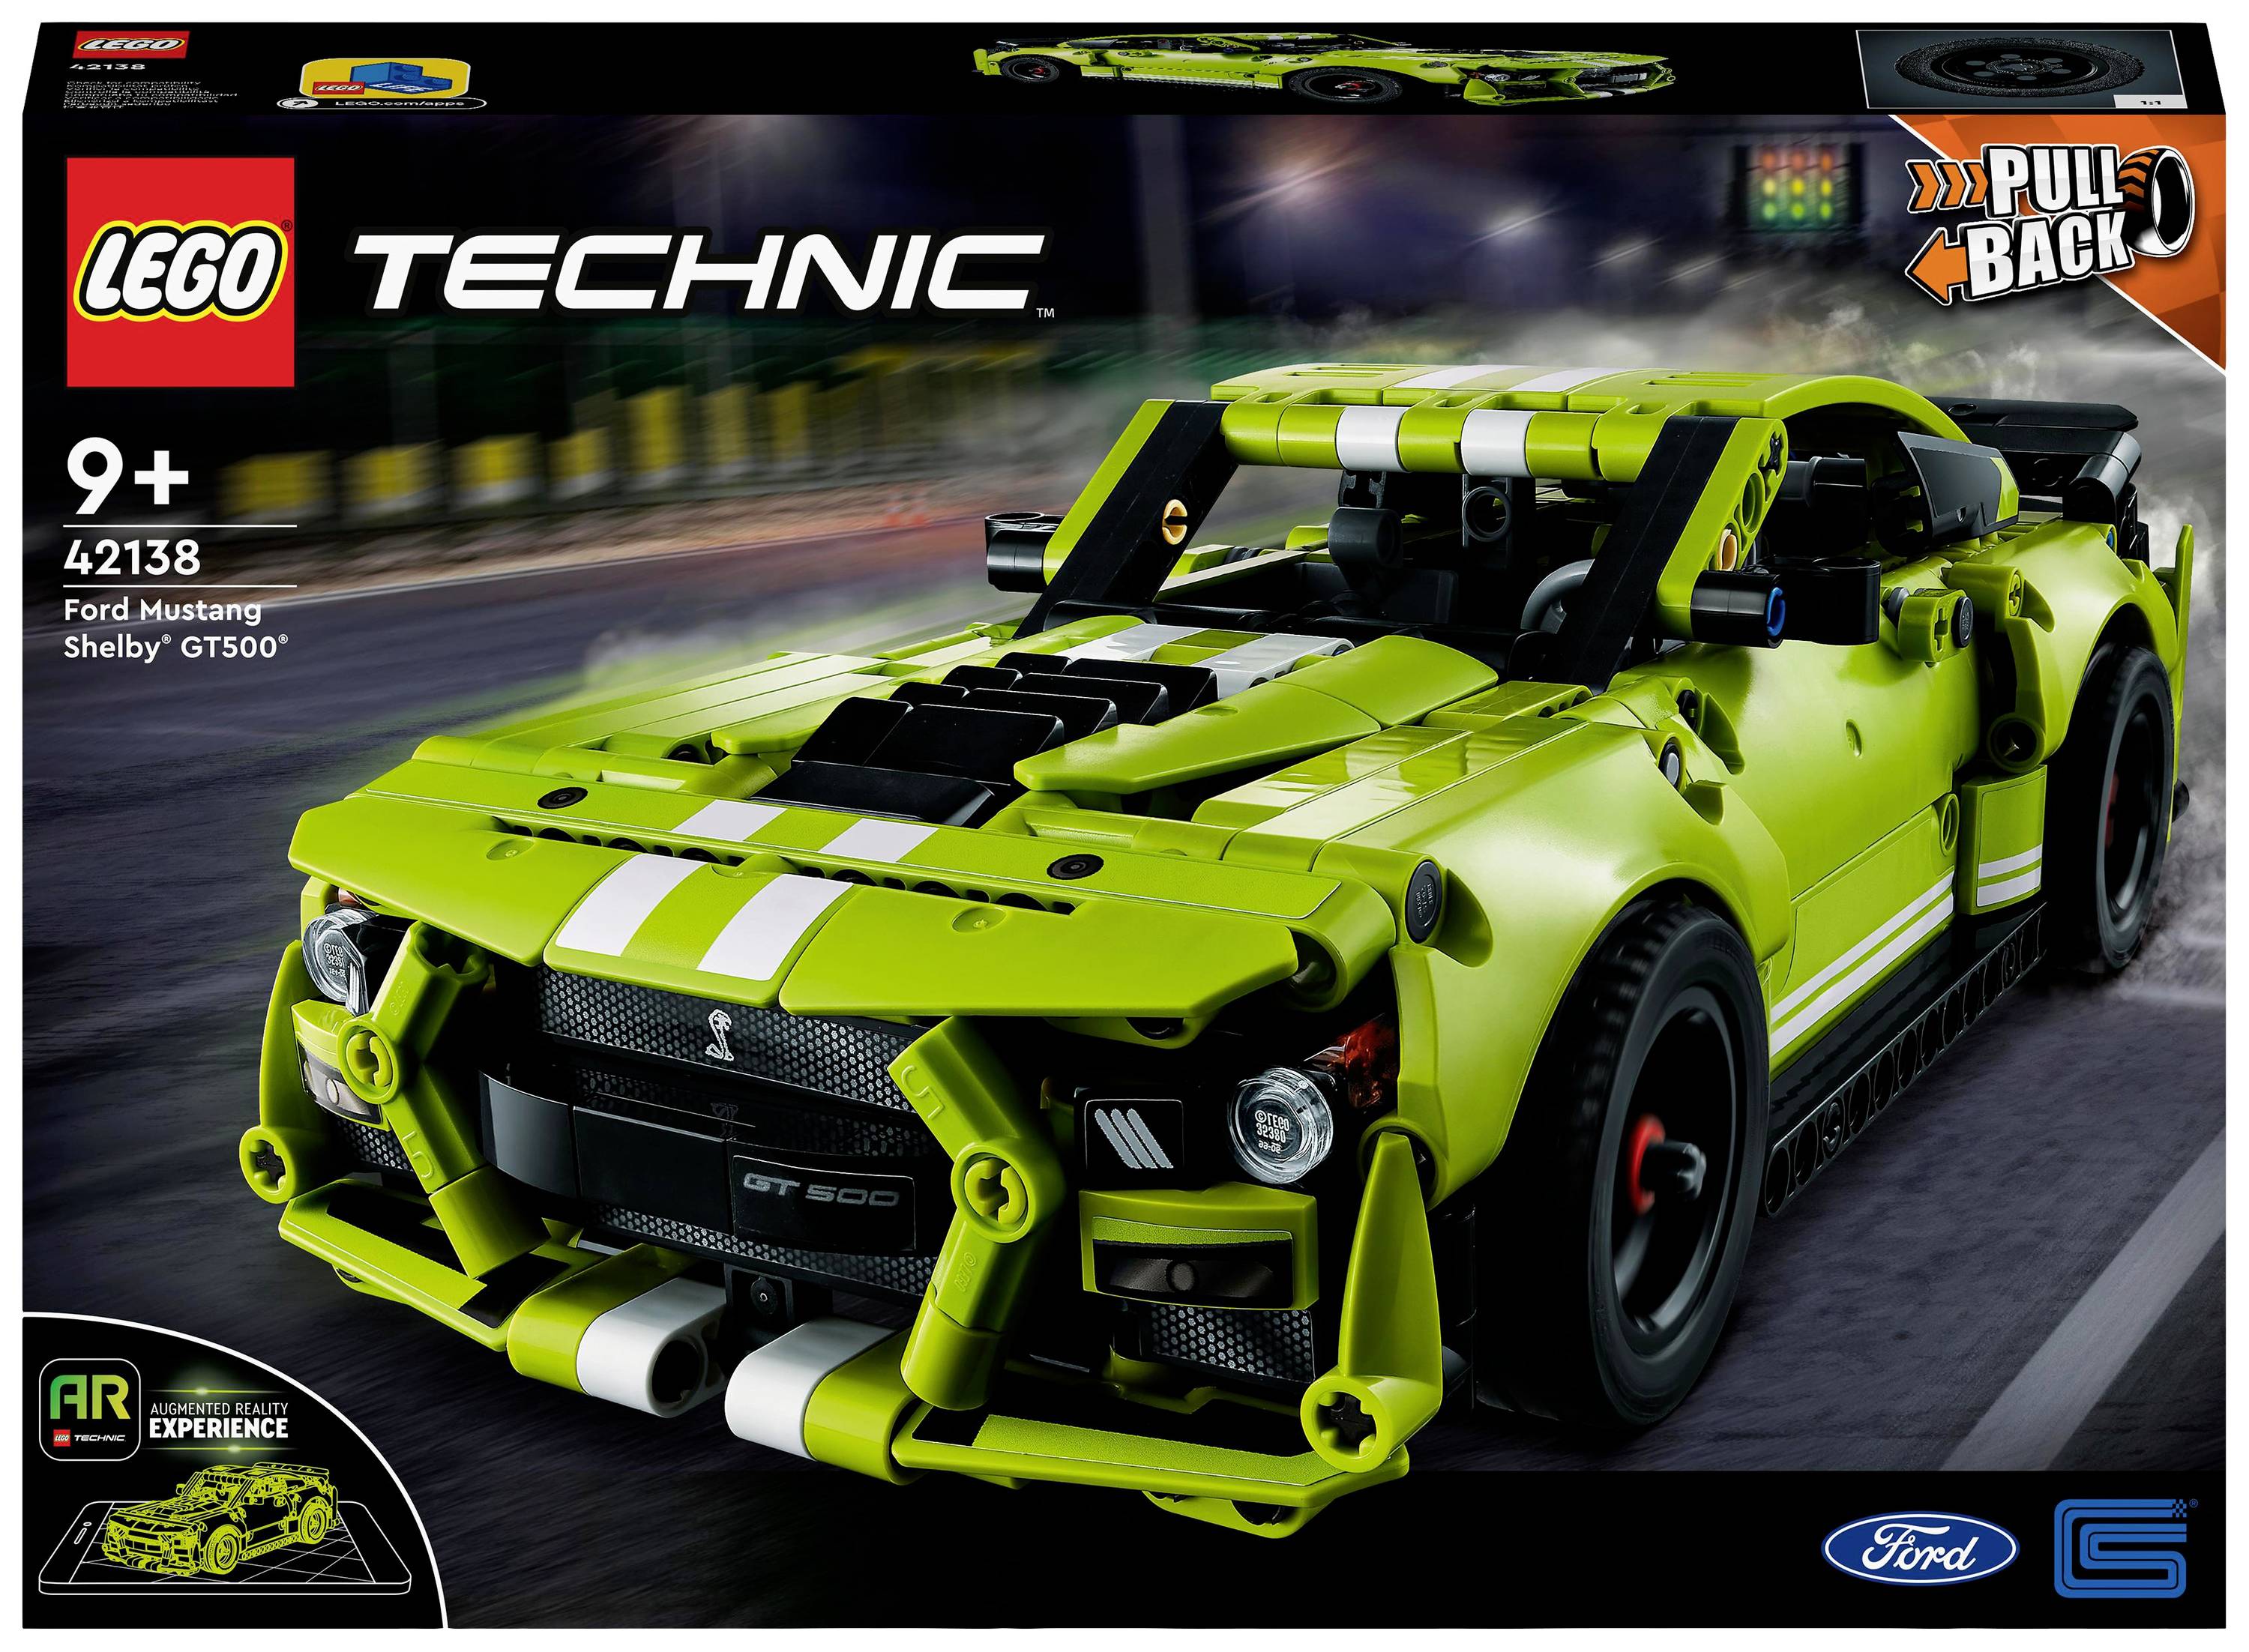 Ford Mustang Shelby® GT500® 42138, Technic